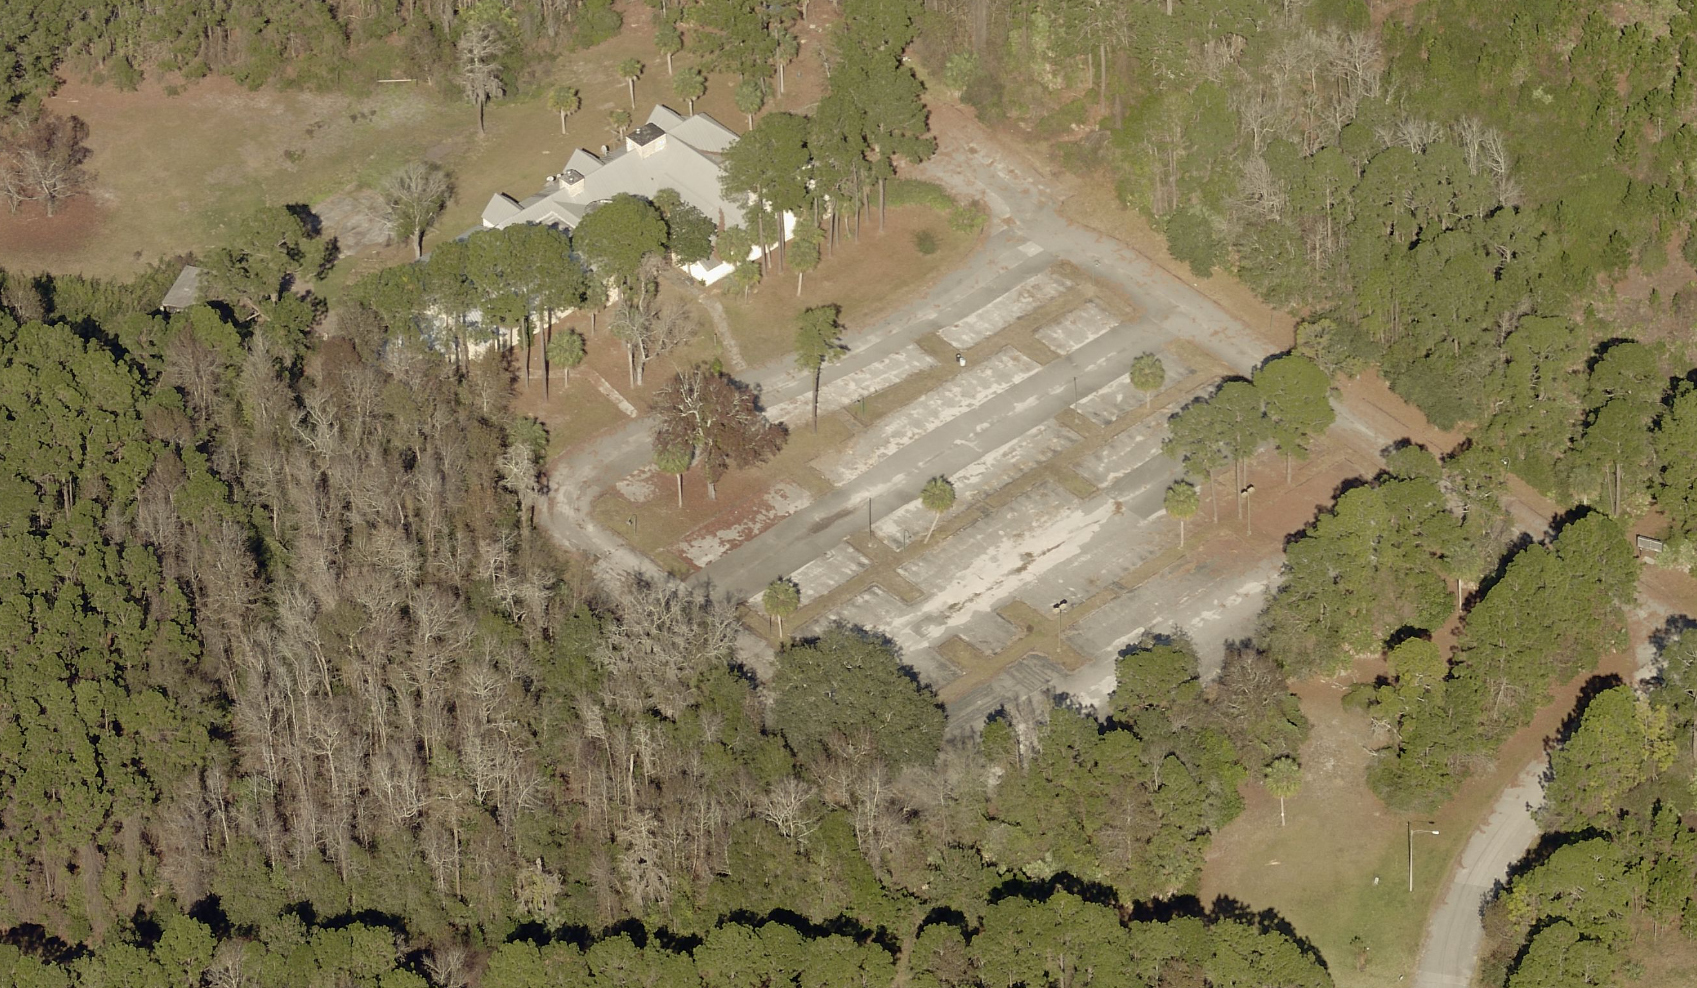 An aerial view of the property.